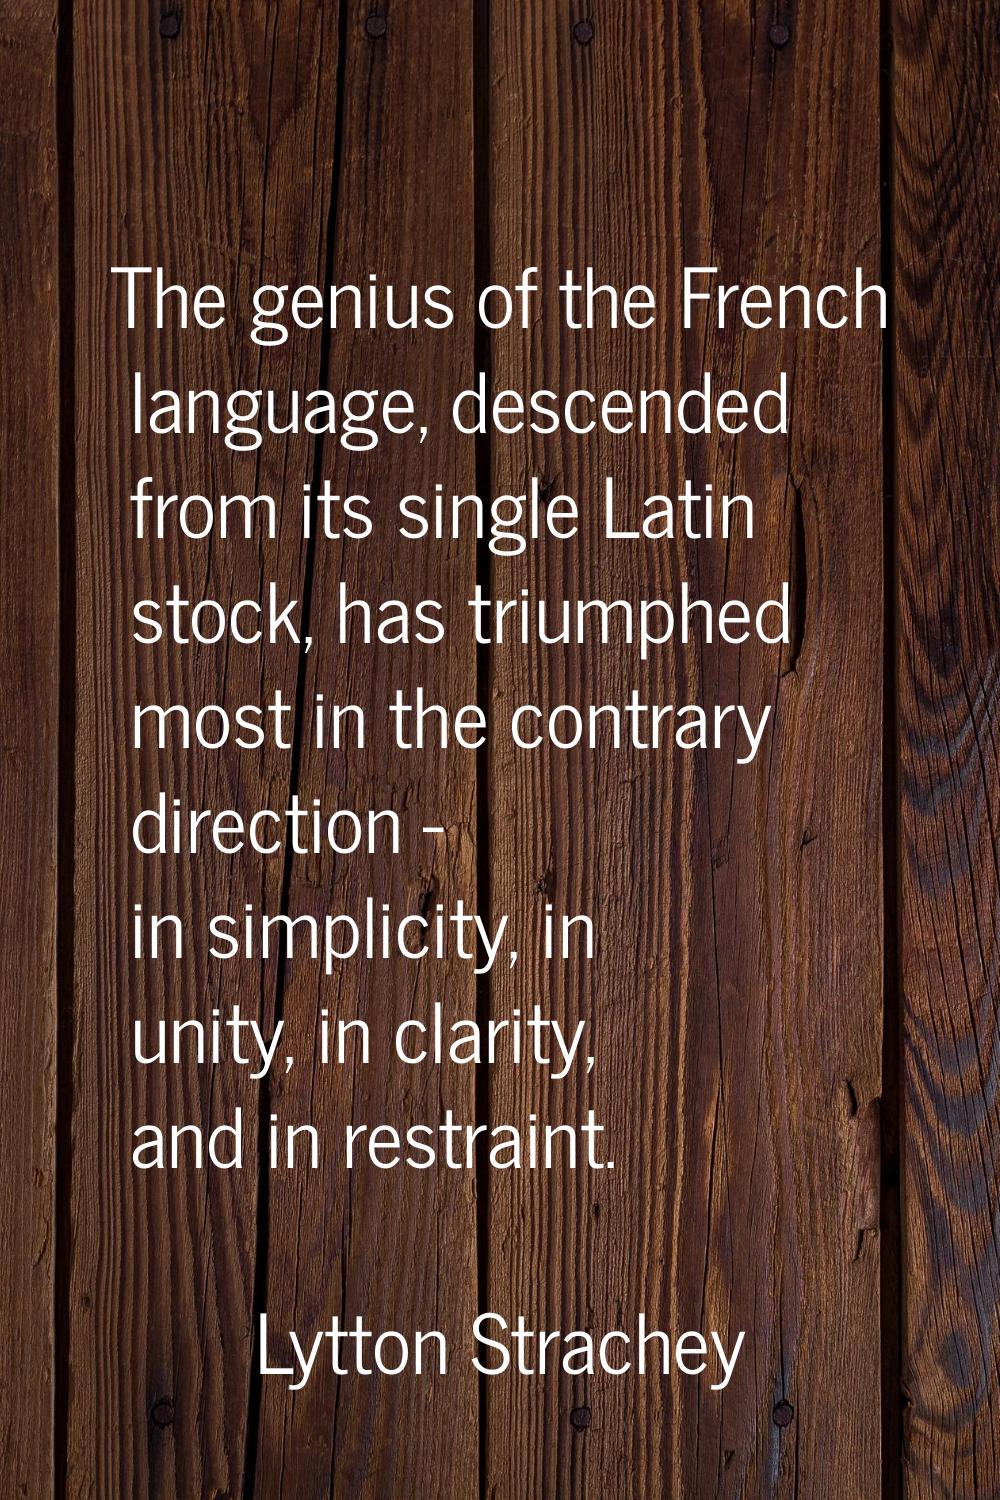 The genius of the French language, descended from its single Latin stock, has triumphed most in the